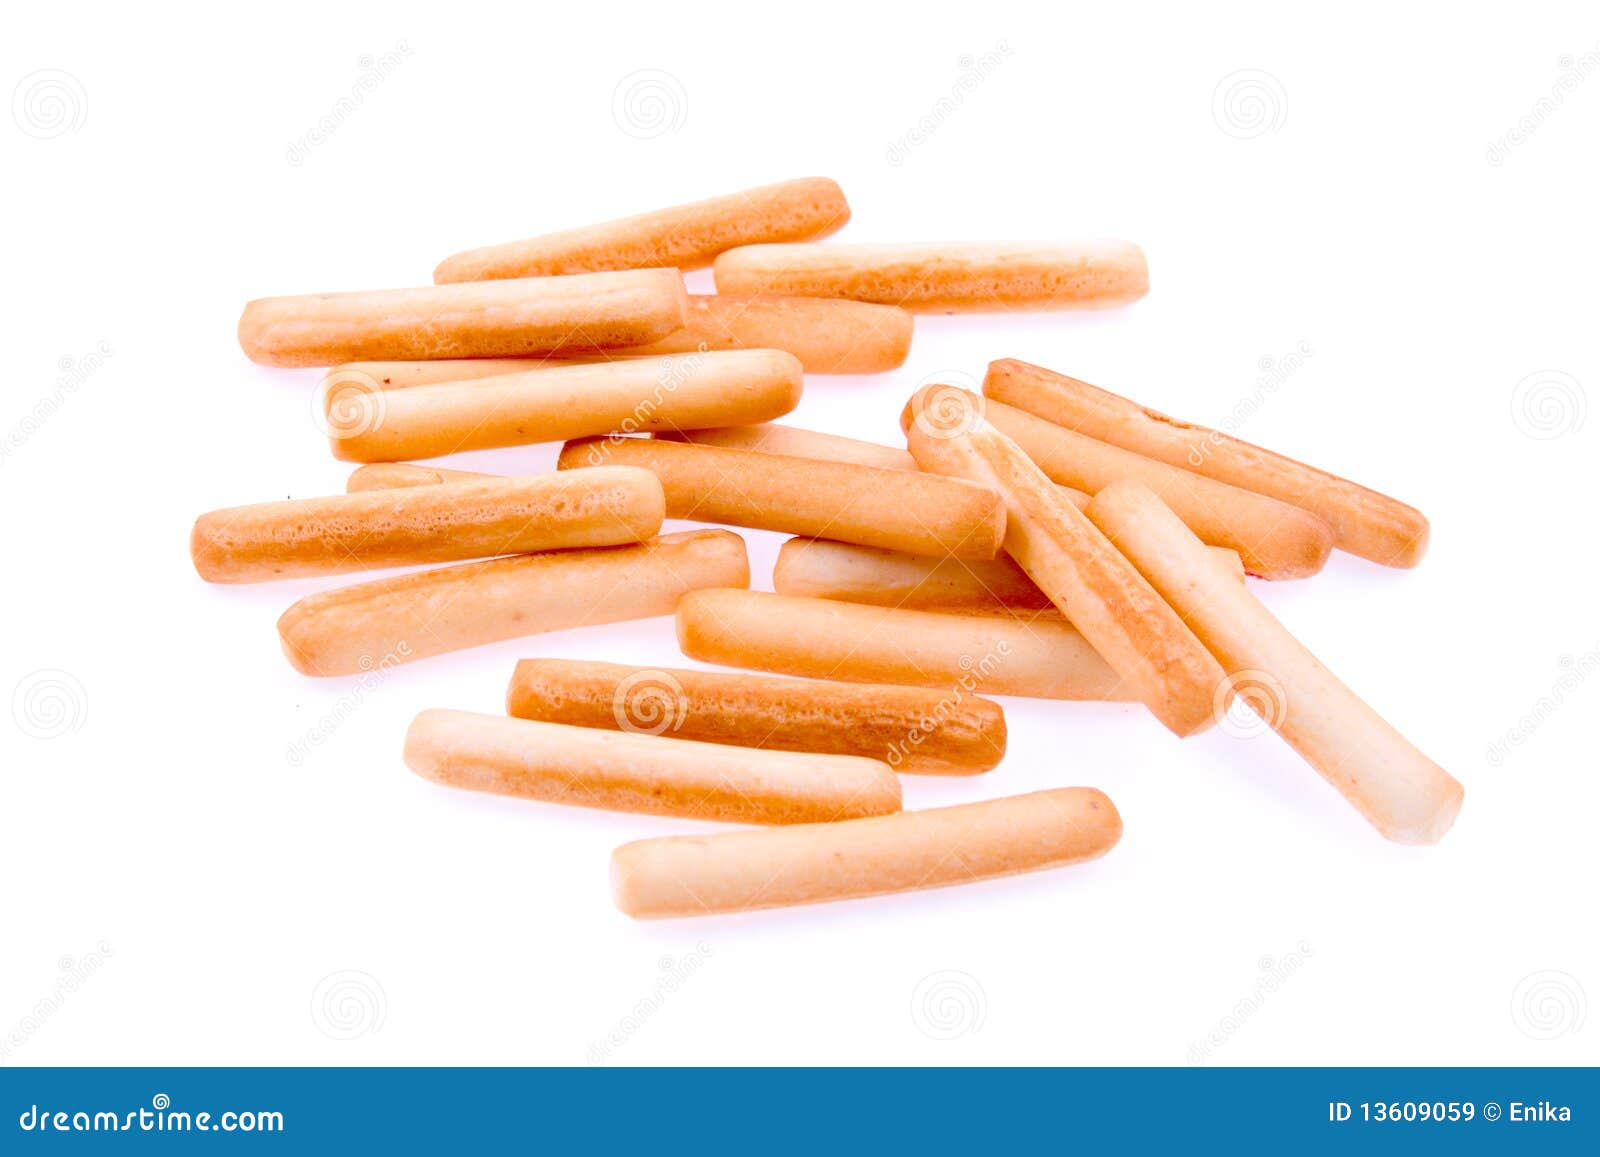 Bread sticks stock image. Image of delicious, junkfood - 13609059